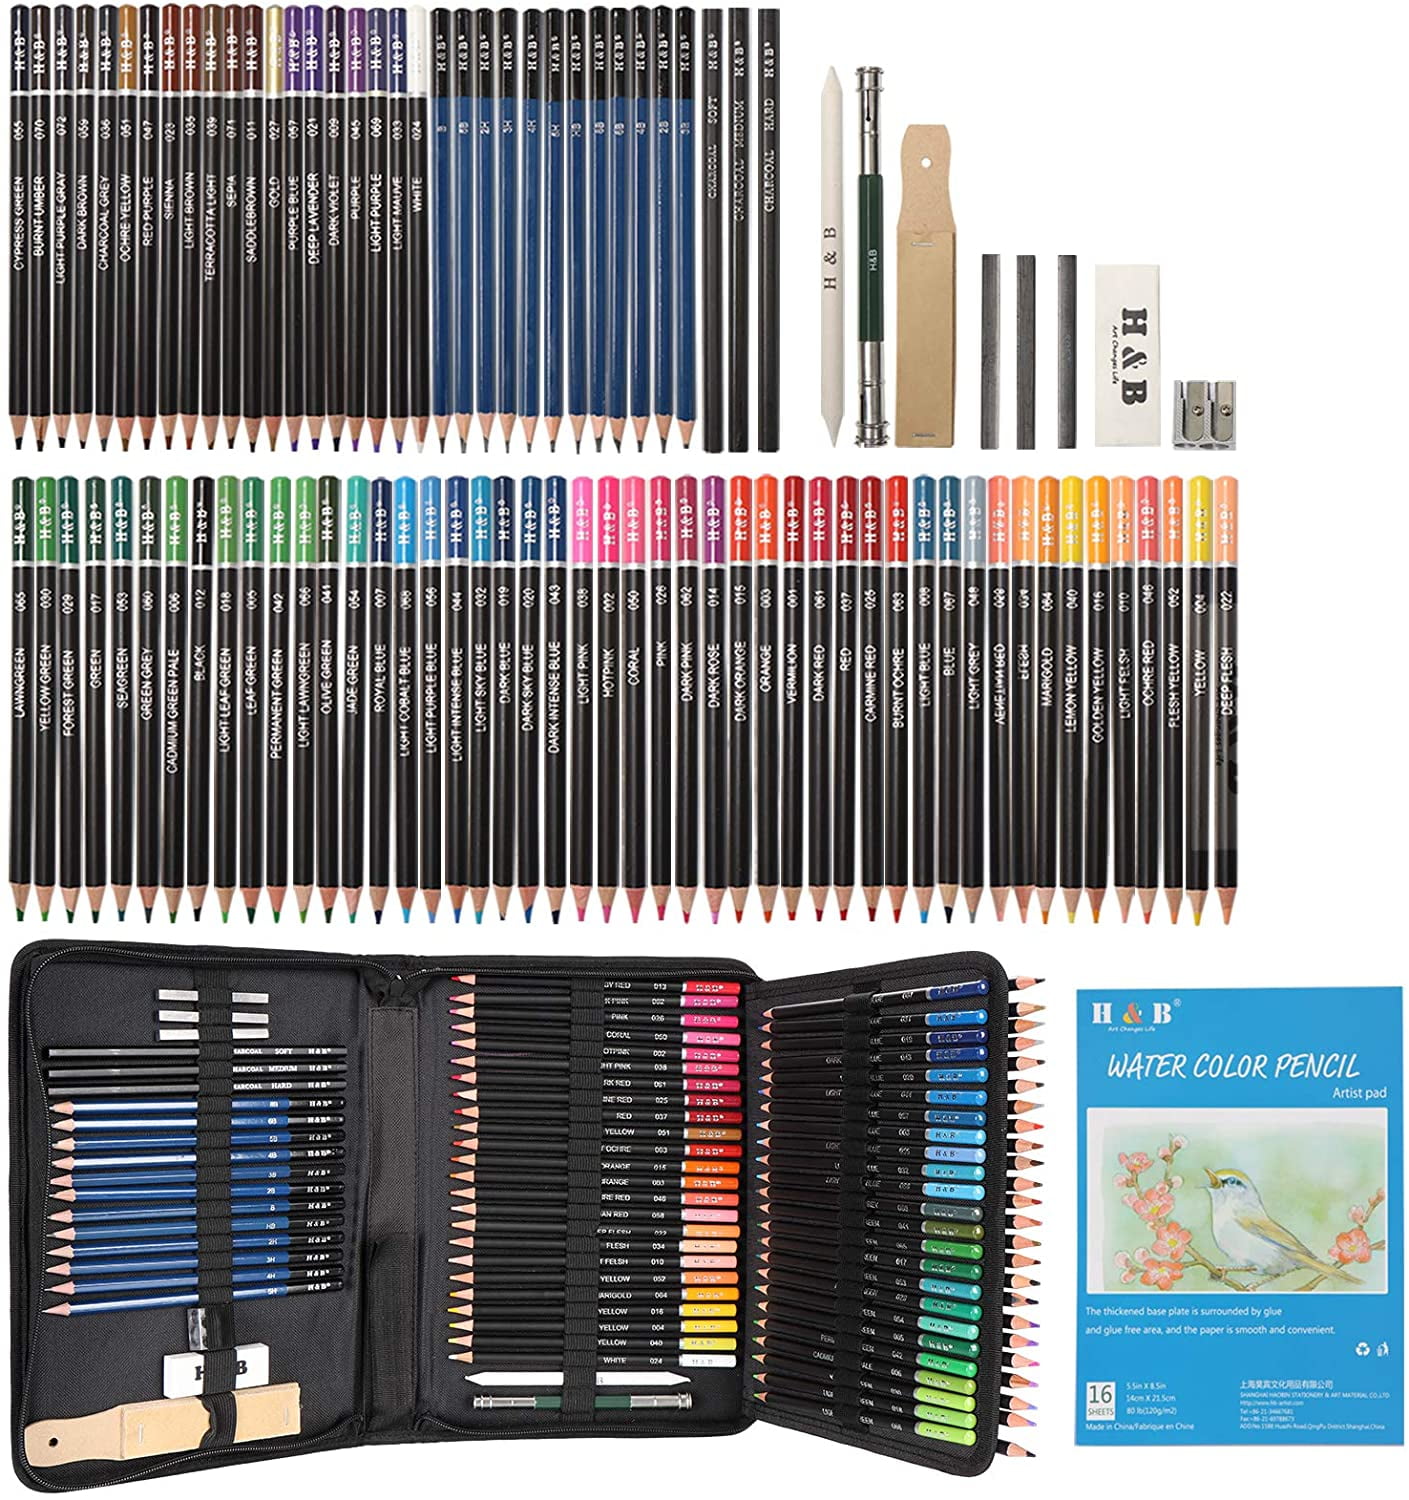 AONLSKHArt Supplies Drawing And Sketching Colored Pencils Set 96-Piece,Graphite Charcoal Professional Artists Pencils Kit,Gifts For Kids & Adults Draw